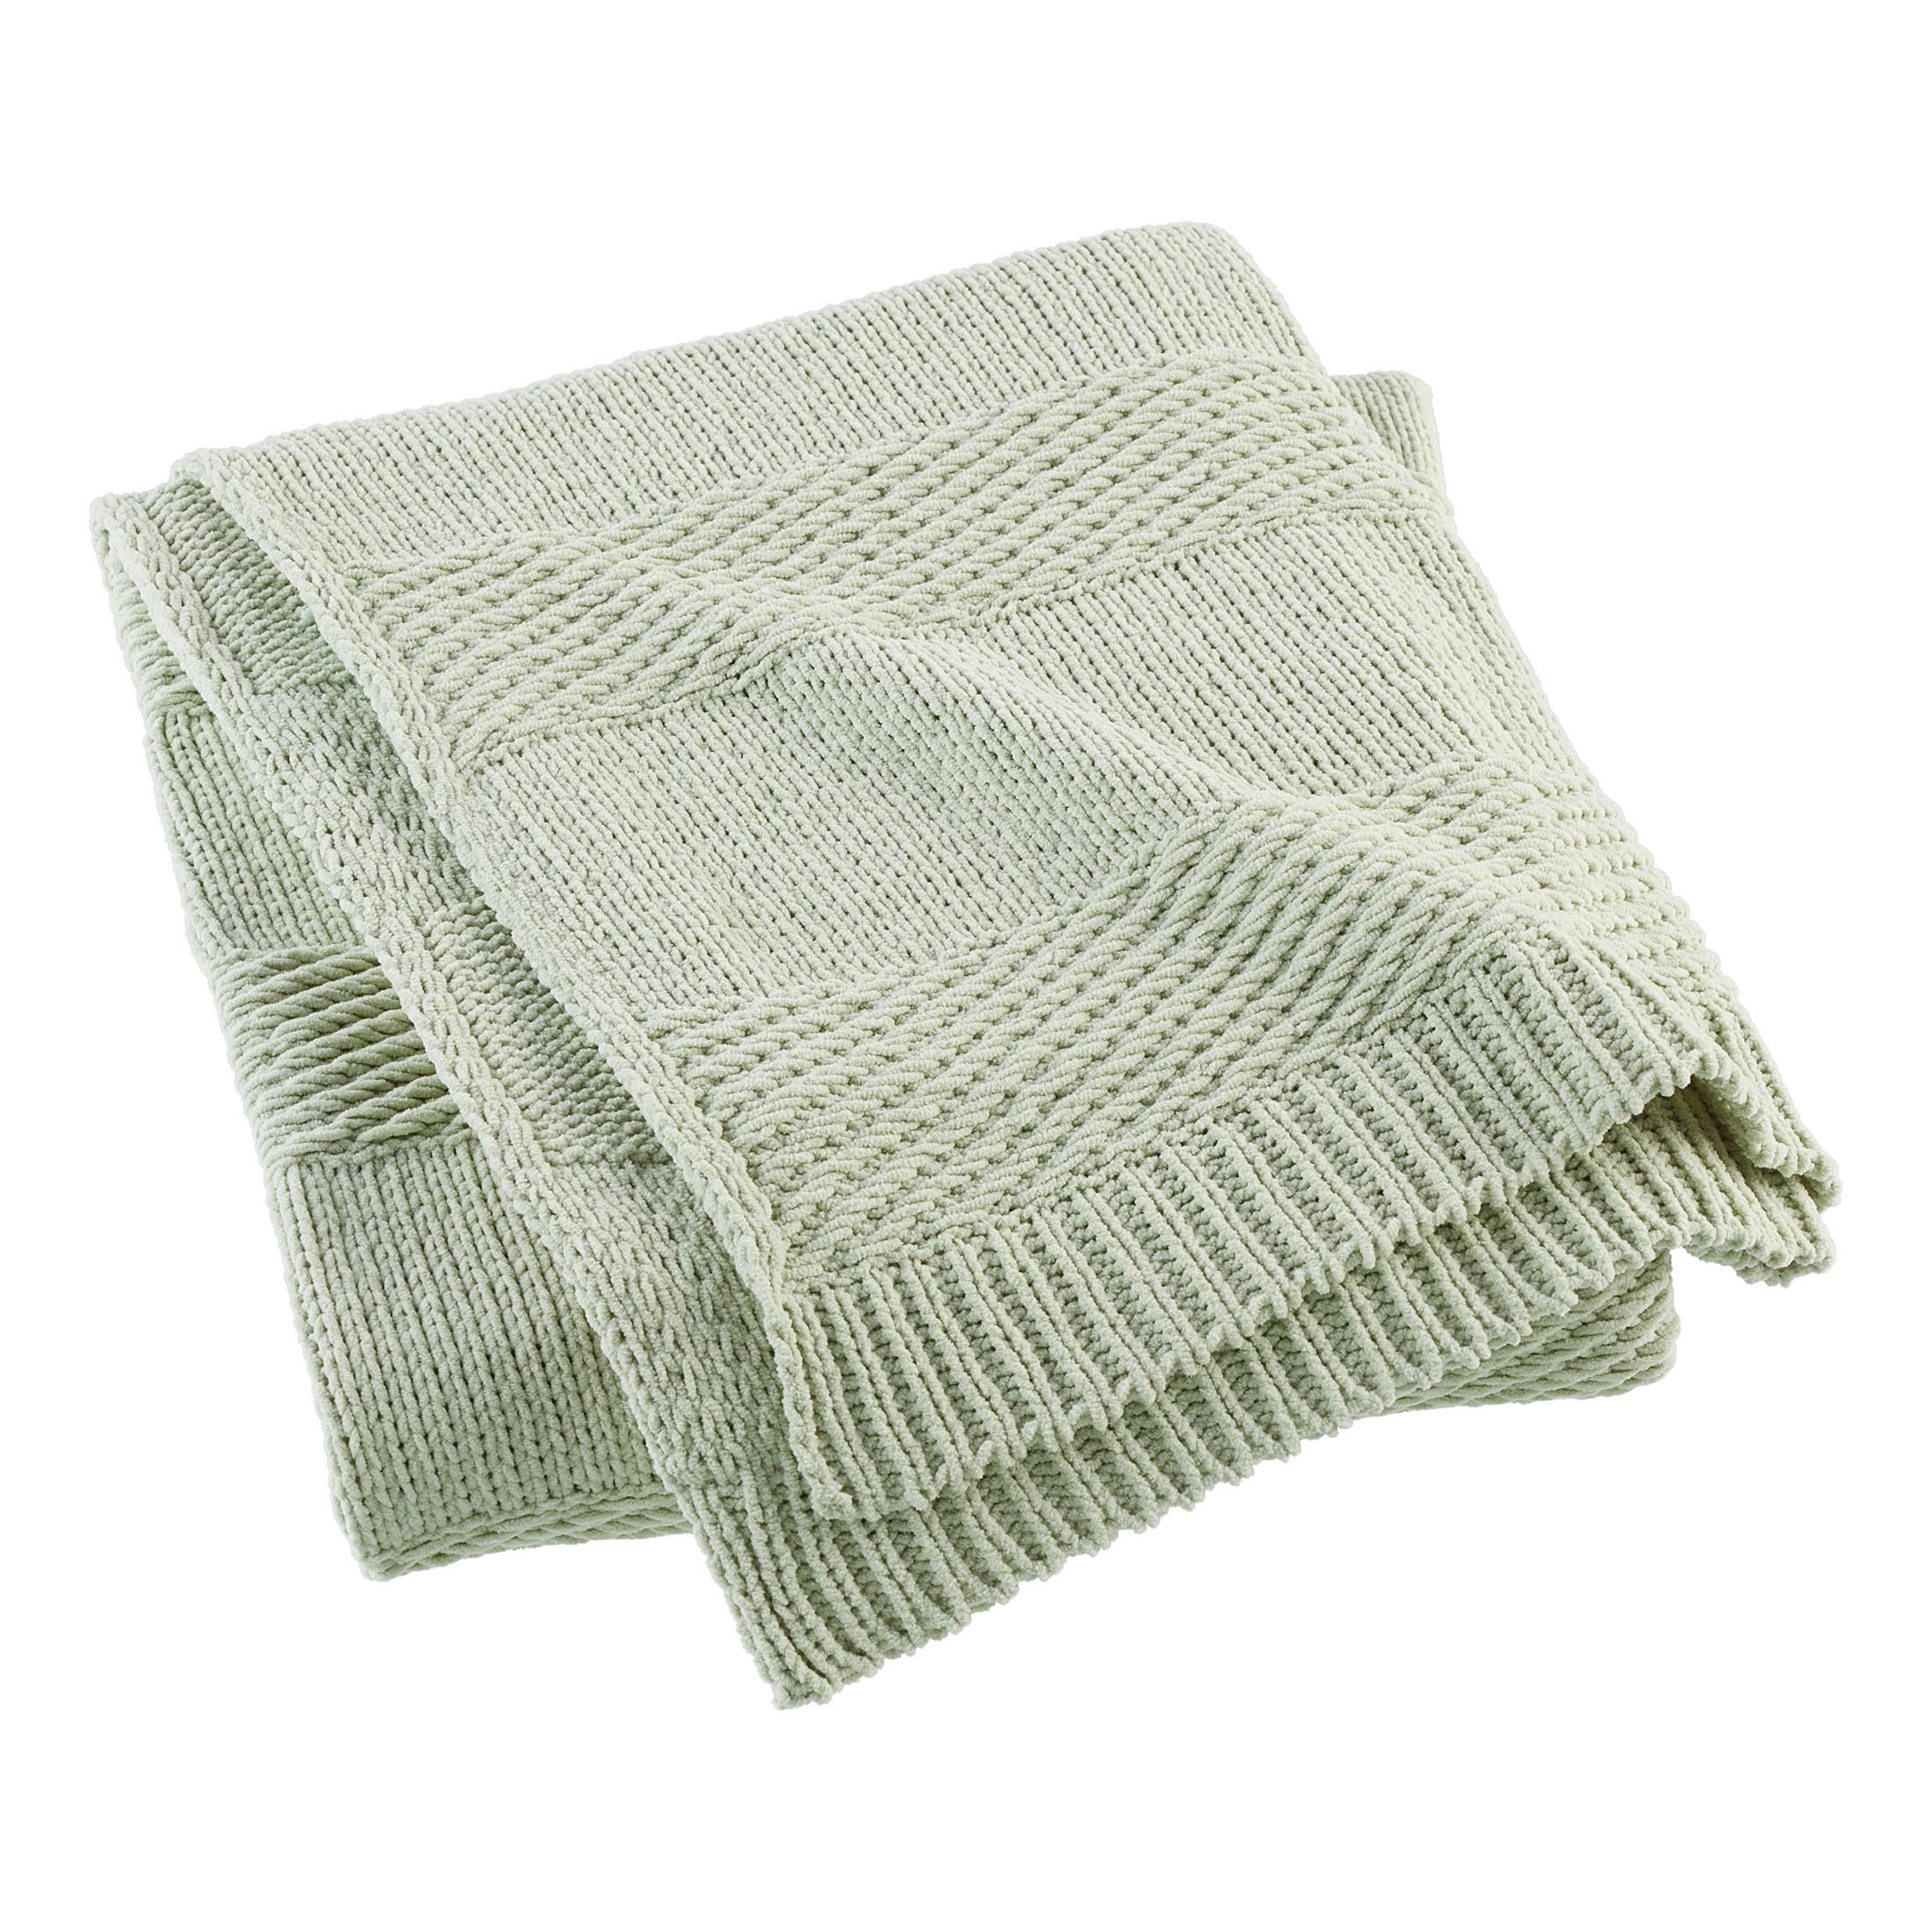 Beautiful Chenille Throw, Sage Green, 50 x 60 inches, by Drew Barrymore - image 1 of 7